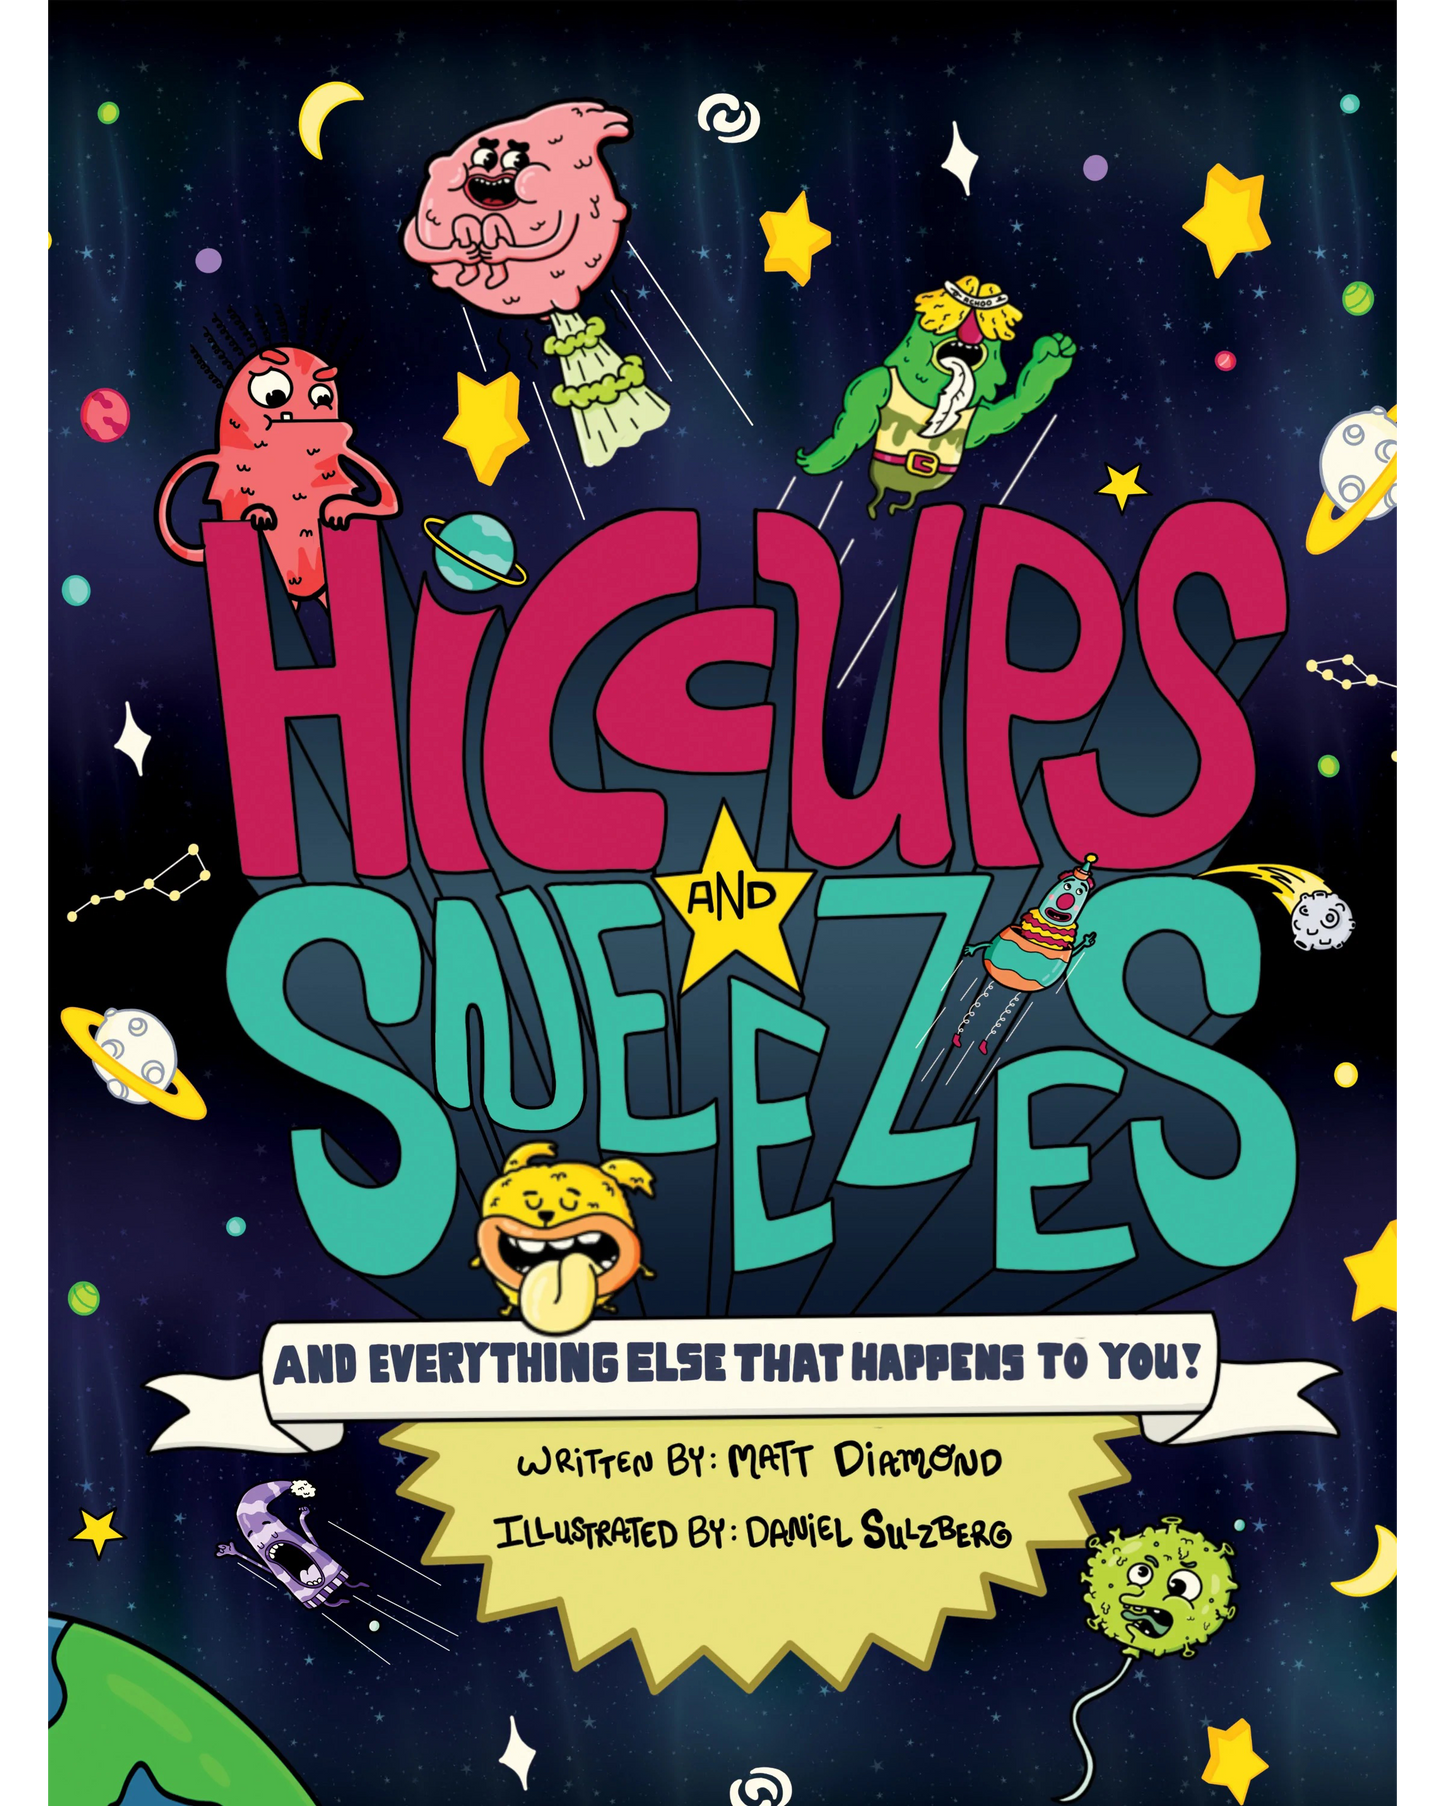 Hiccups and Sneezes: And Everything Else That Happens To You